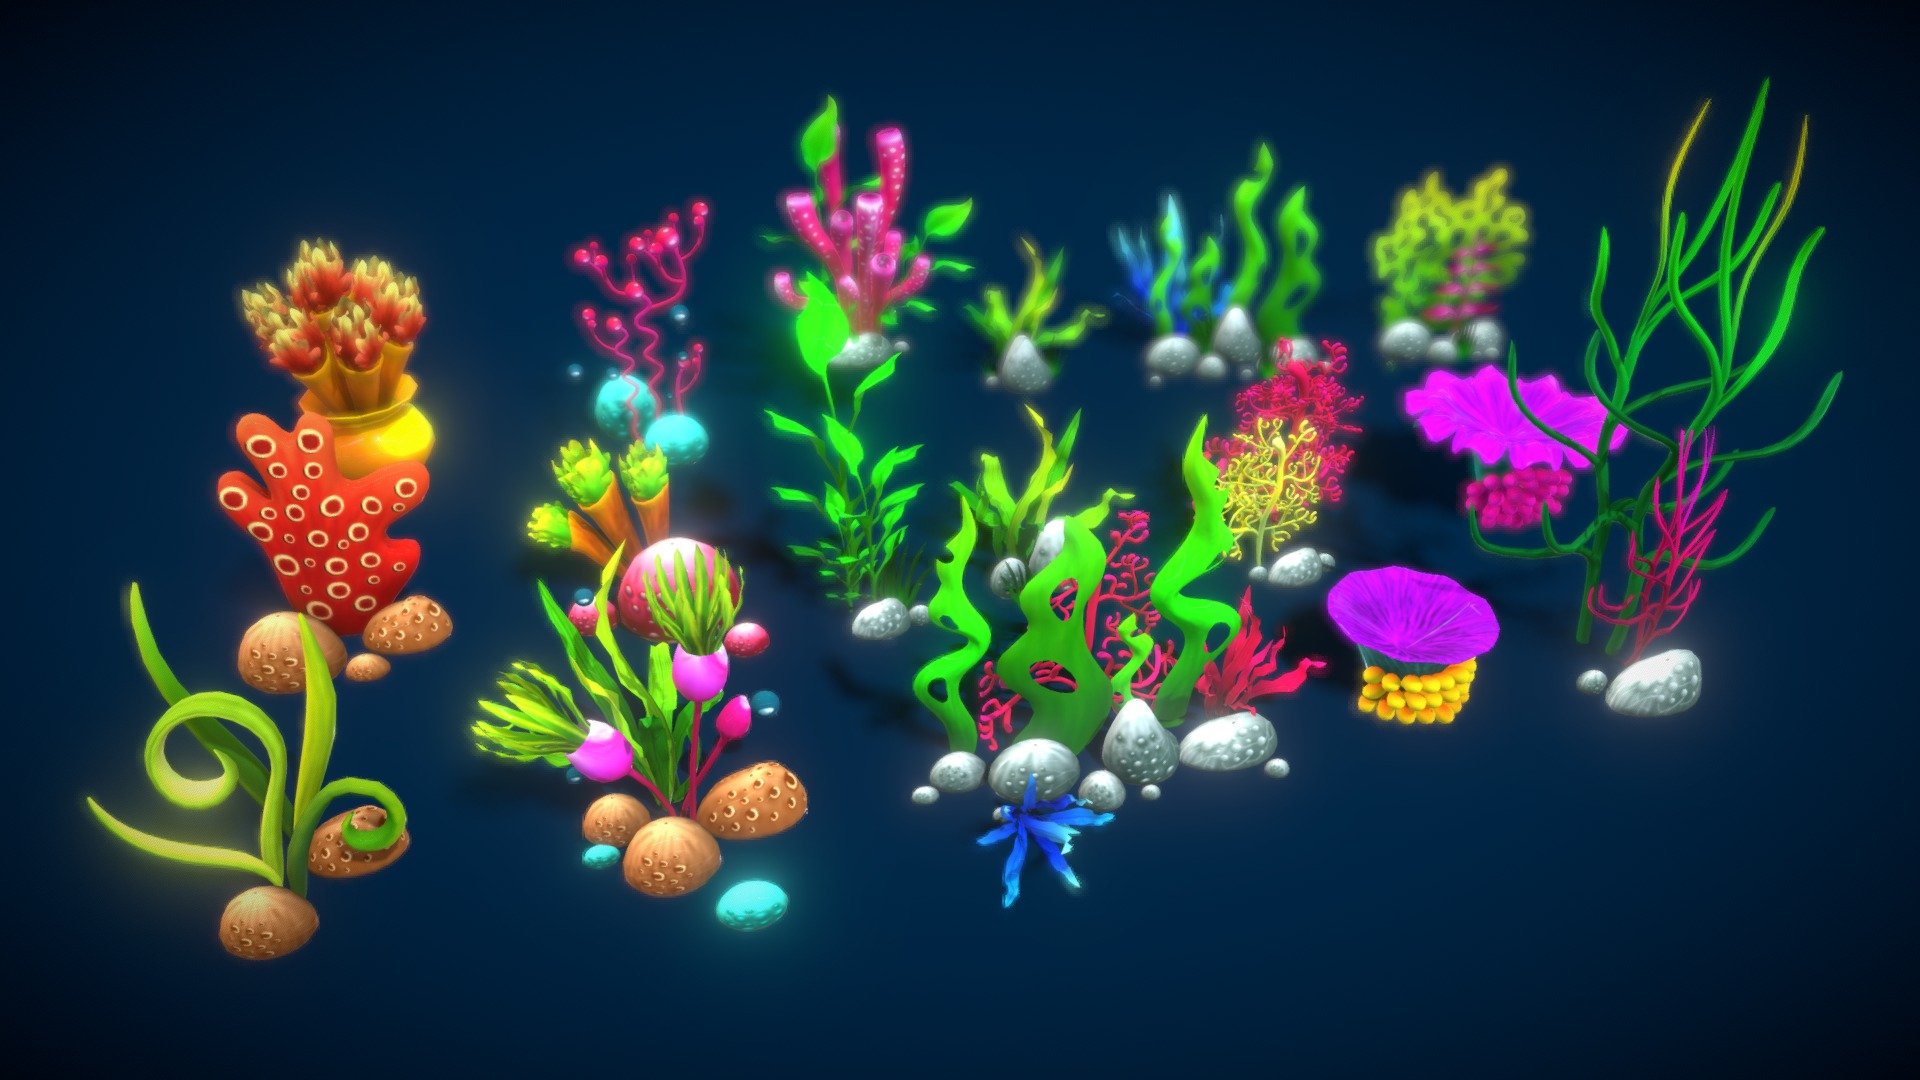 This is Cartoon Seaweed 7 is now available with animation for some coral!
As its name, this asset is extensively packed for easy creation of complex underwater environments.
All elements help you to create a colorful world for an aquarium game, fishing game, or simply decoration item in your social game!
Pack contains 17 +prefabs, easy to customize your own forest of underwater plants.
In detail, the model is attached as below:
- Seaweed : 17+ types in the 100+ variations
- Atlas texture with size 1024x1024.
- Geometry: +Triangles: 283860 +Polygons:145847 +Vertices: 149796 - Cartoon Seaweed 7 - Buy Royalty Free 3D model by vustudios 3d model